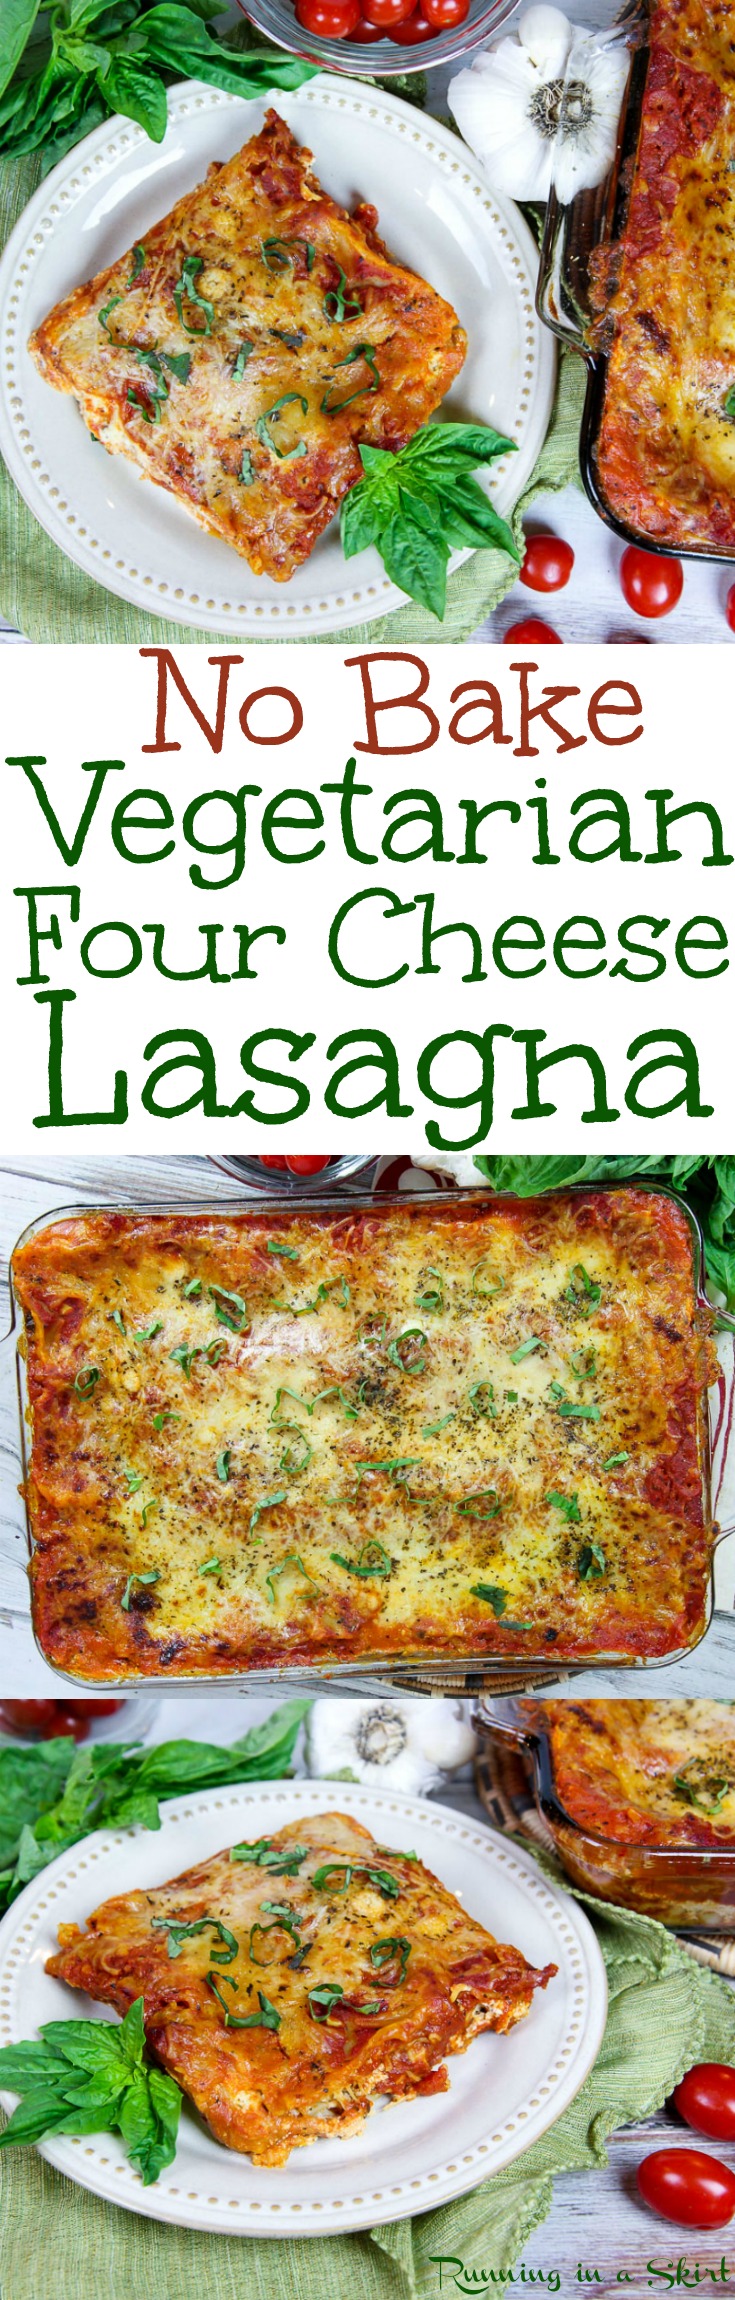 The Best Easy Vegetarian Lasagna recipe - No Boil! This simple, four cheese, classic lasagna is perfect for a crowd. Uses cheesy ricotta, tomato sauce and noodles. Tastes amazing and you can make ahead. / Running in a Skirt via @juliewunder